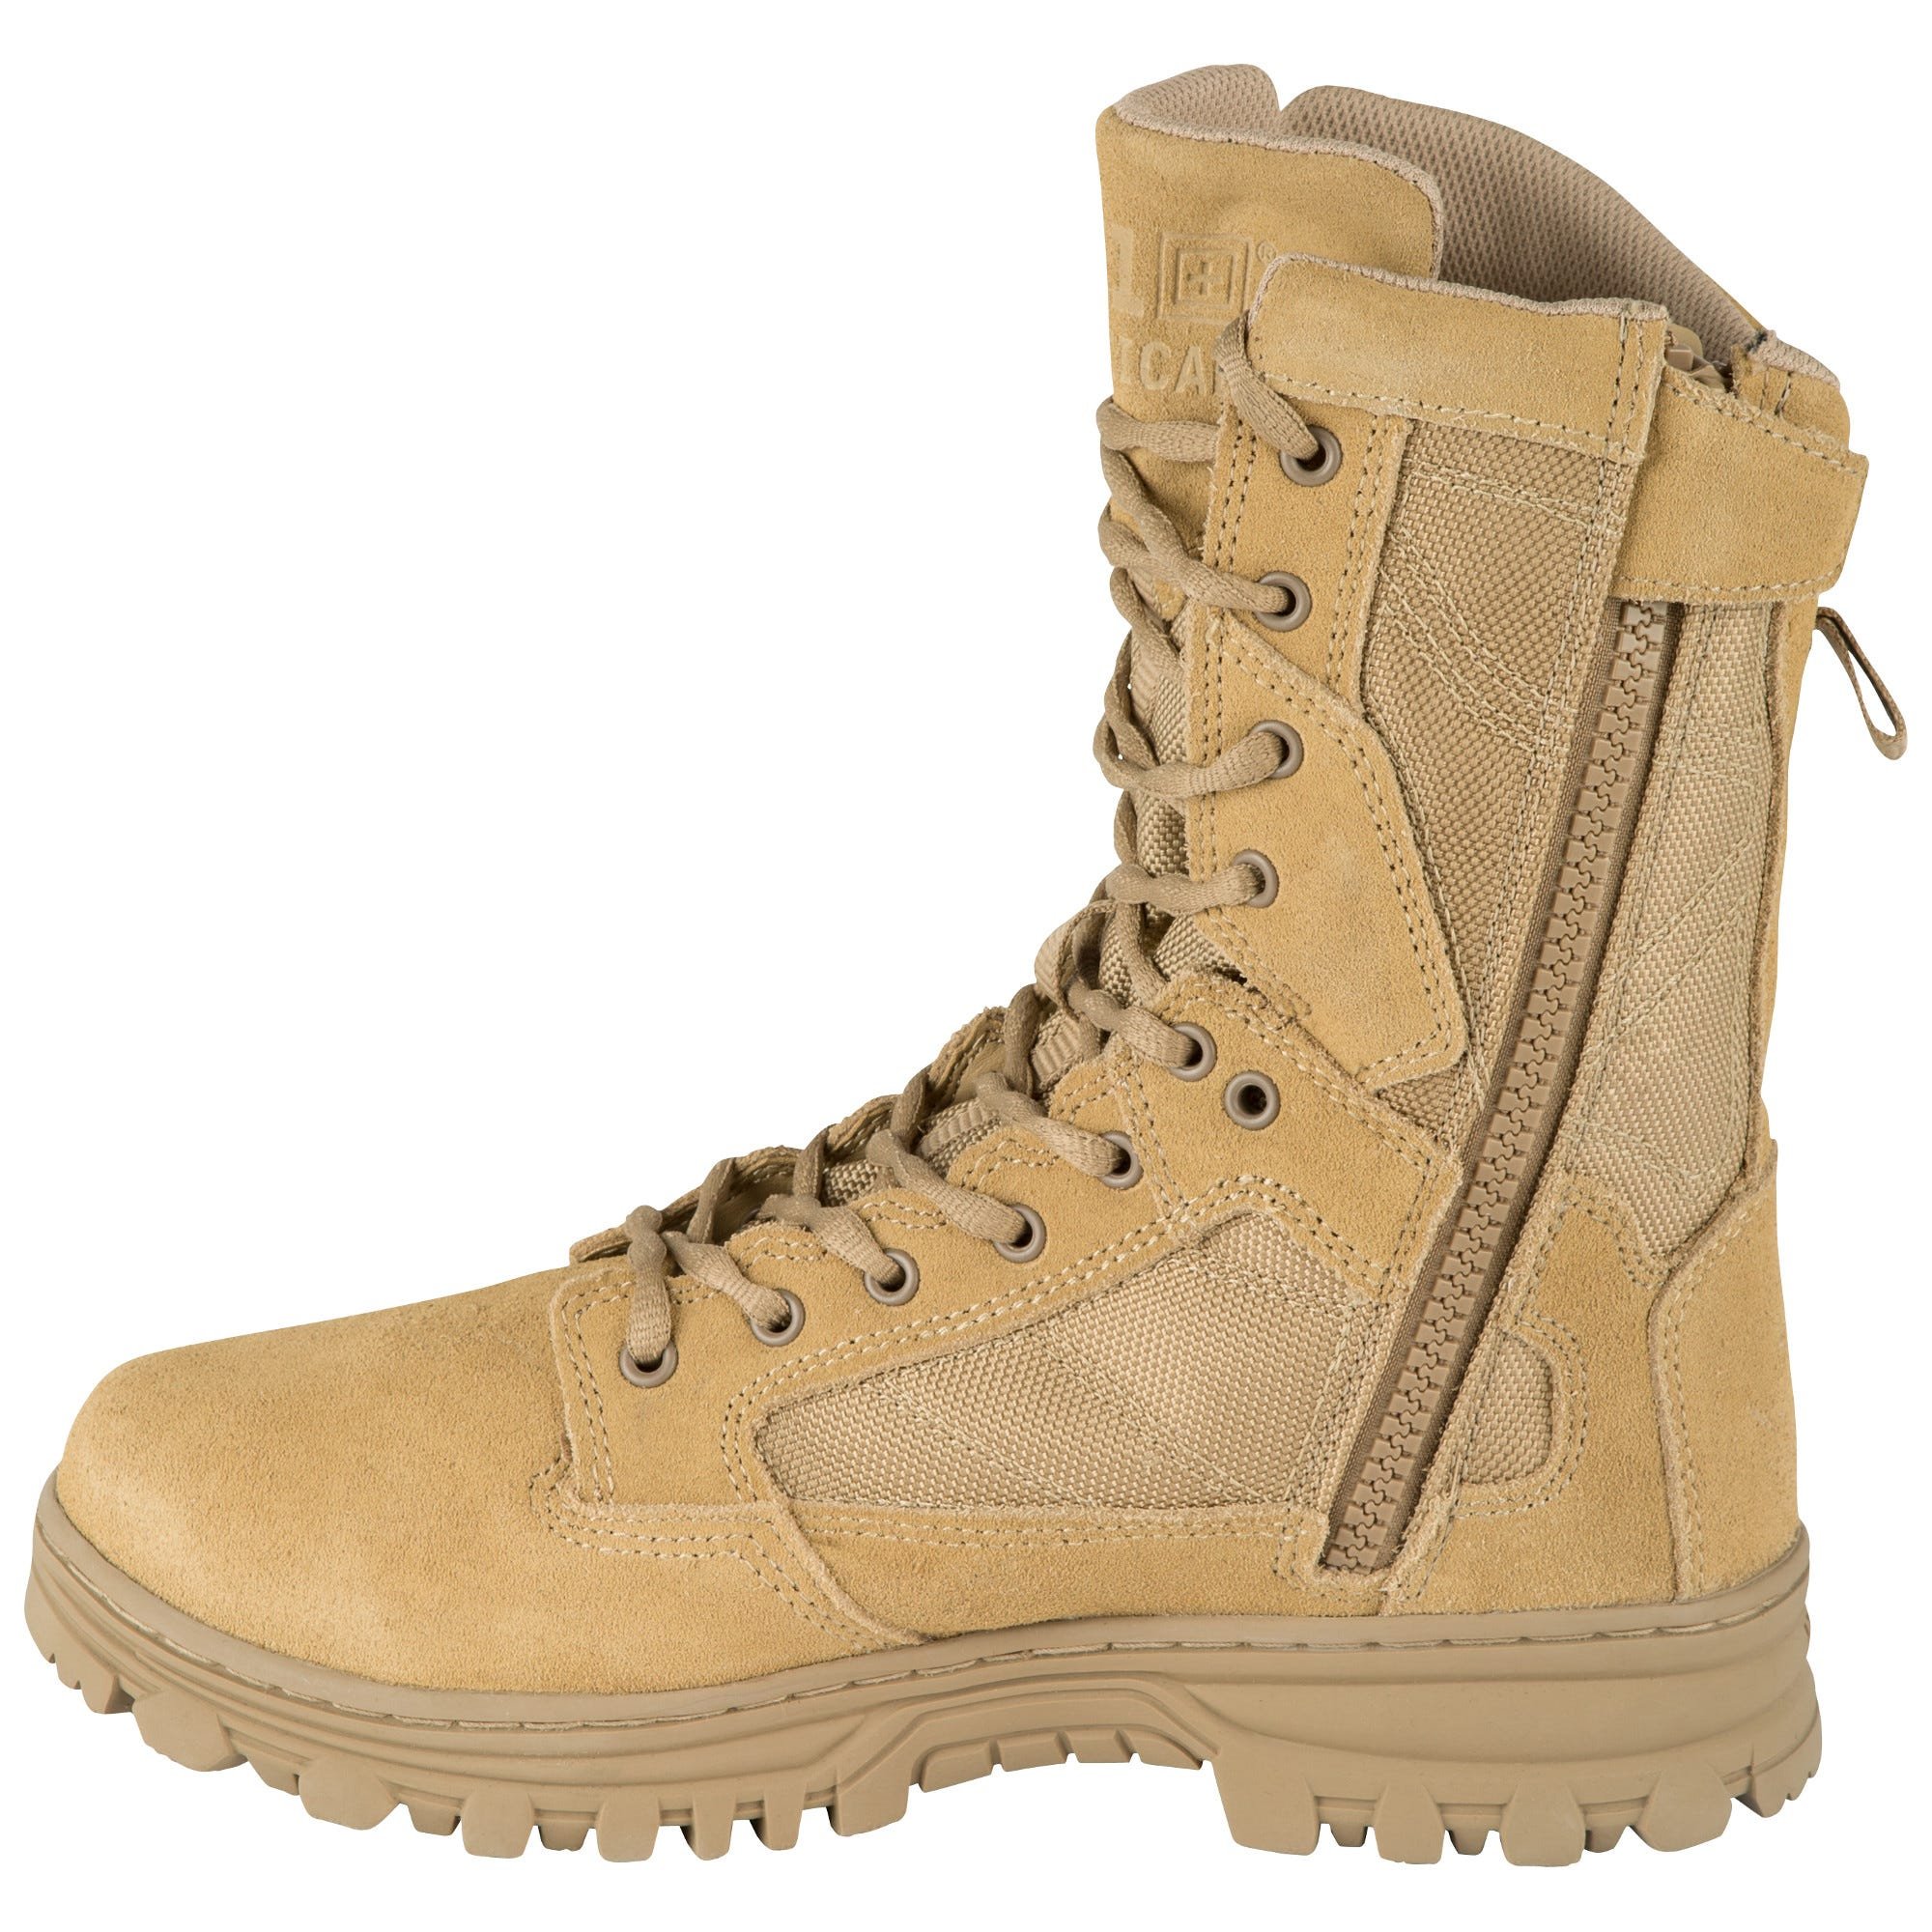 5.11 Work Gear EVO 8-Inch Waterproof Boots, Oil/Slip-Resistant, OrthoLite Insole, Coyote, 6/Regular, Style 12347 - image 4 of 4